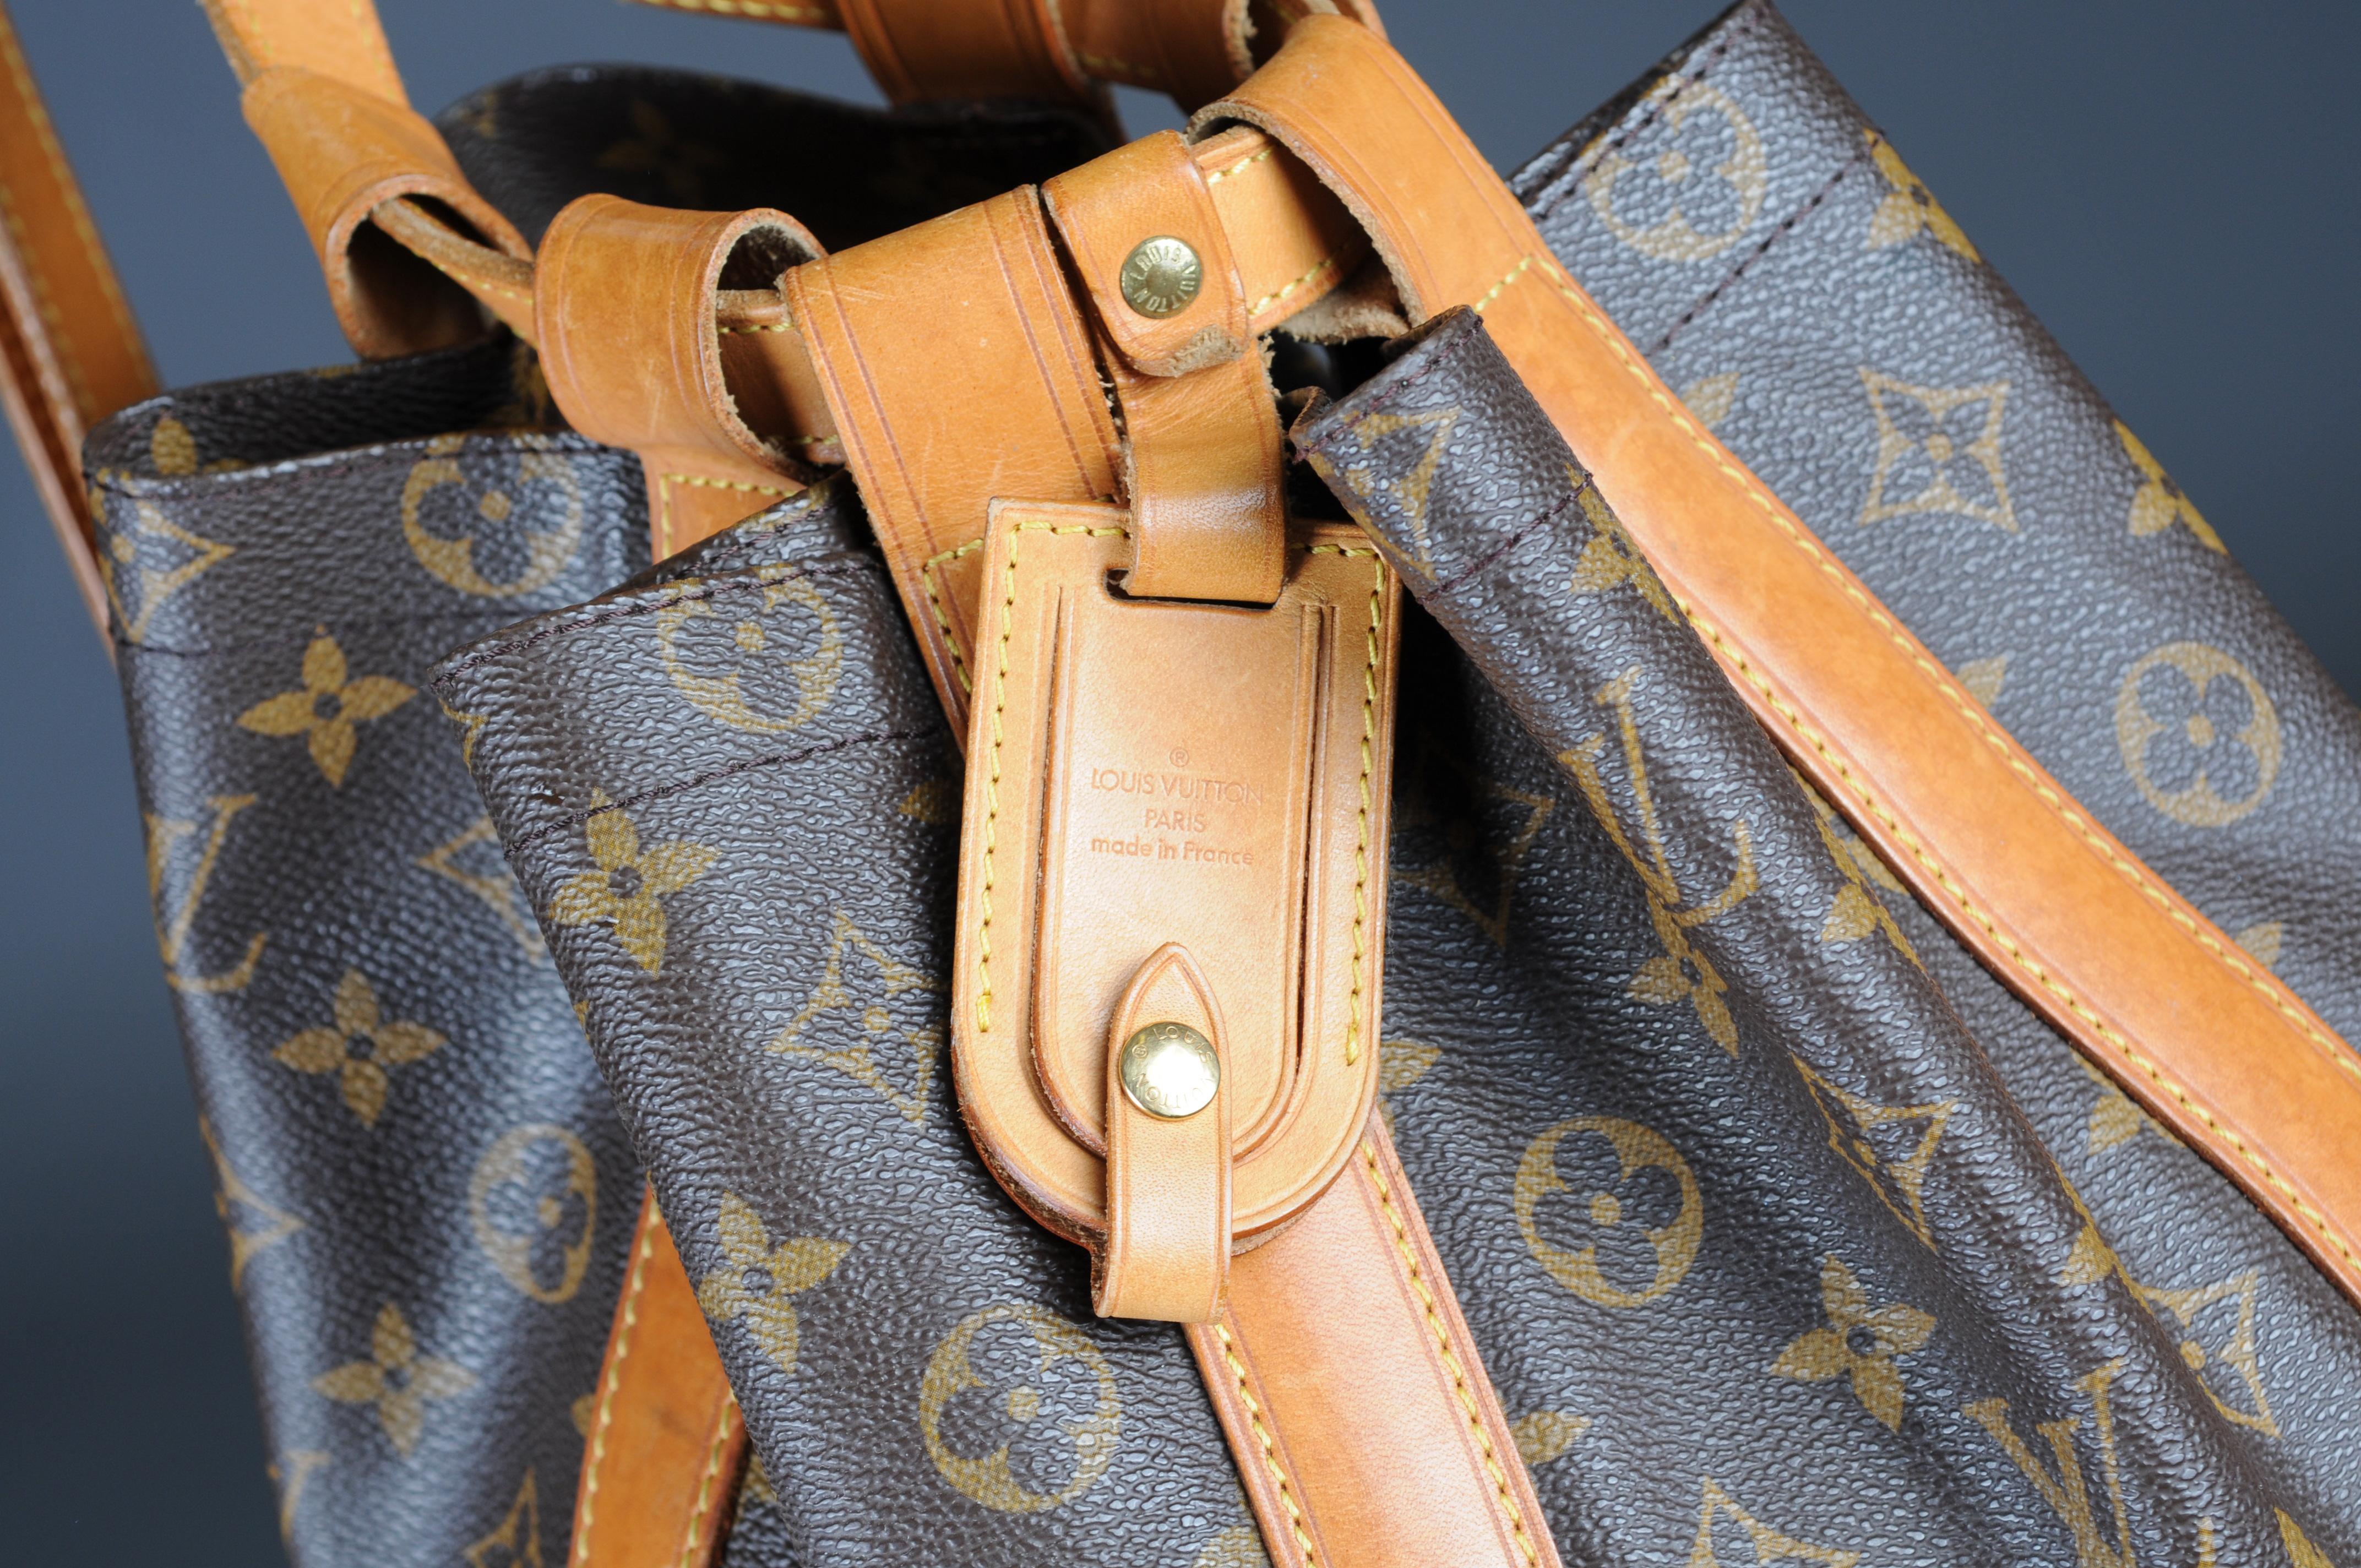 LOUIS VUITTON LOUIS VUITTON Romeo Gigli Romeo Gigli Monogram 100th Anniversary Limited Edition Monogram Football Crossbody Bag M99029 One Shoulder Limited to 120 rare models in Japan. The seventh photo is a reference image and the others are actual